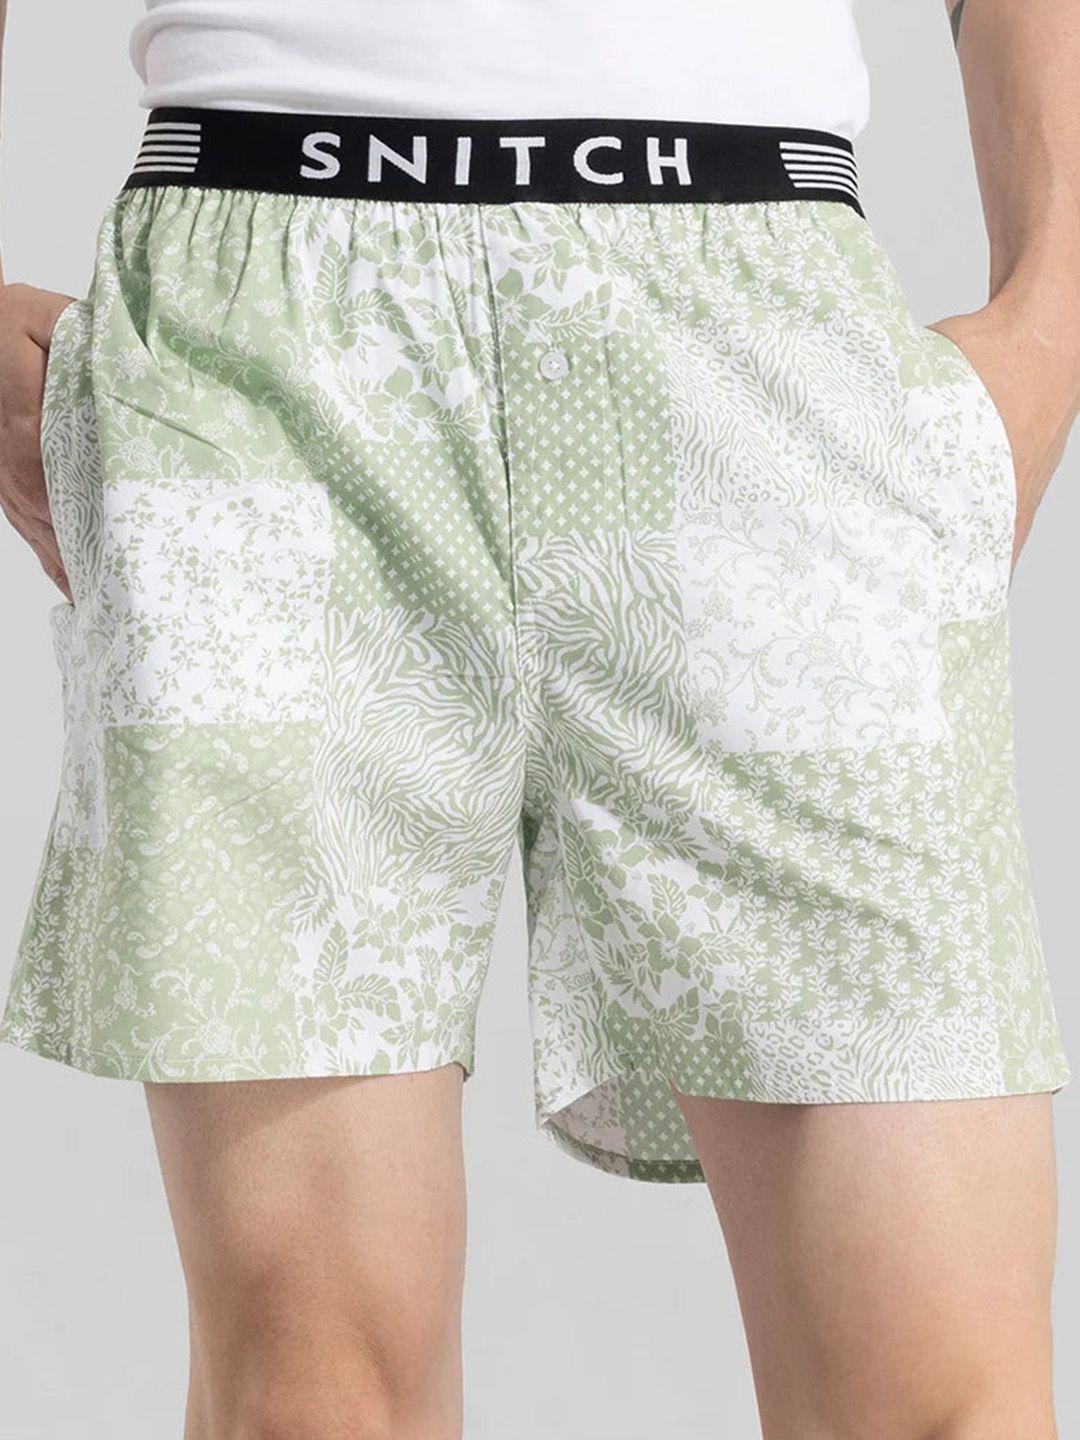 snitch printed pure cotton boxers 4msbx9217-09-s